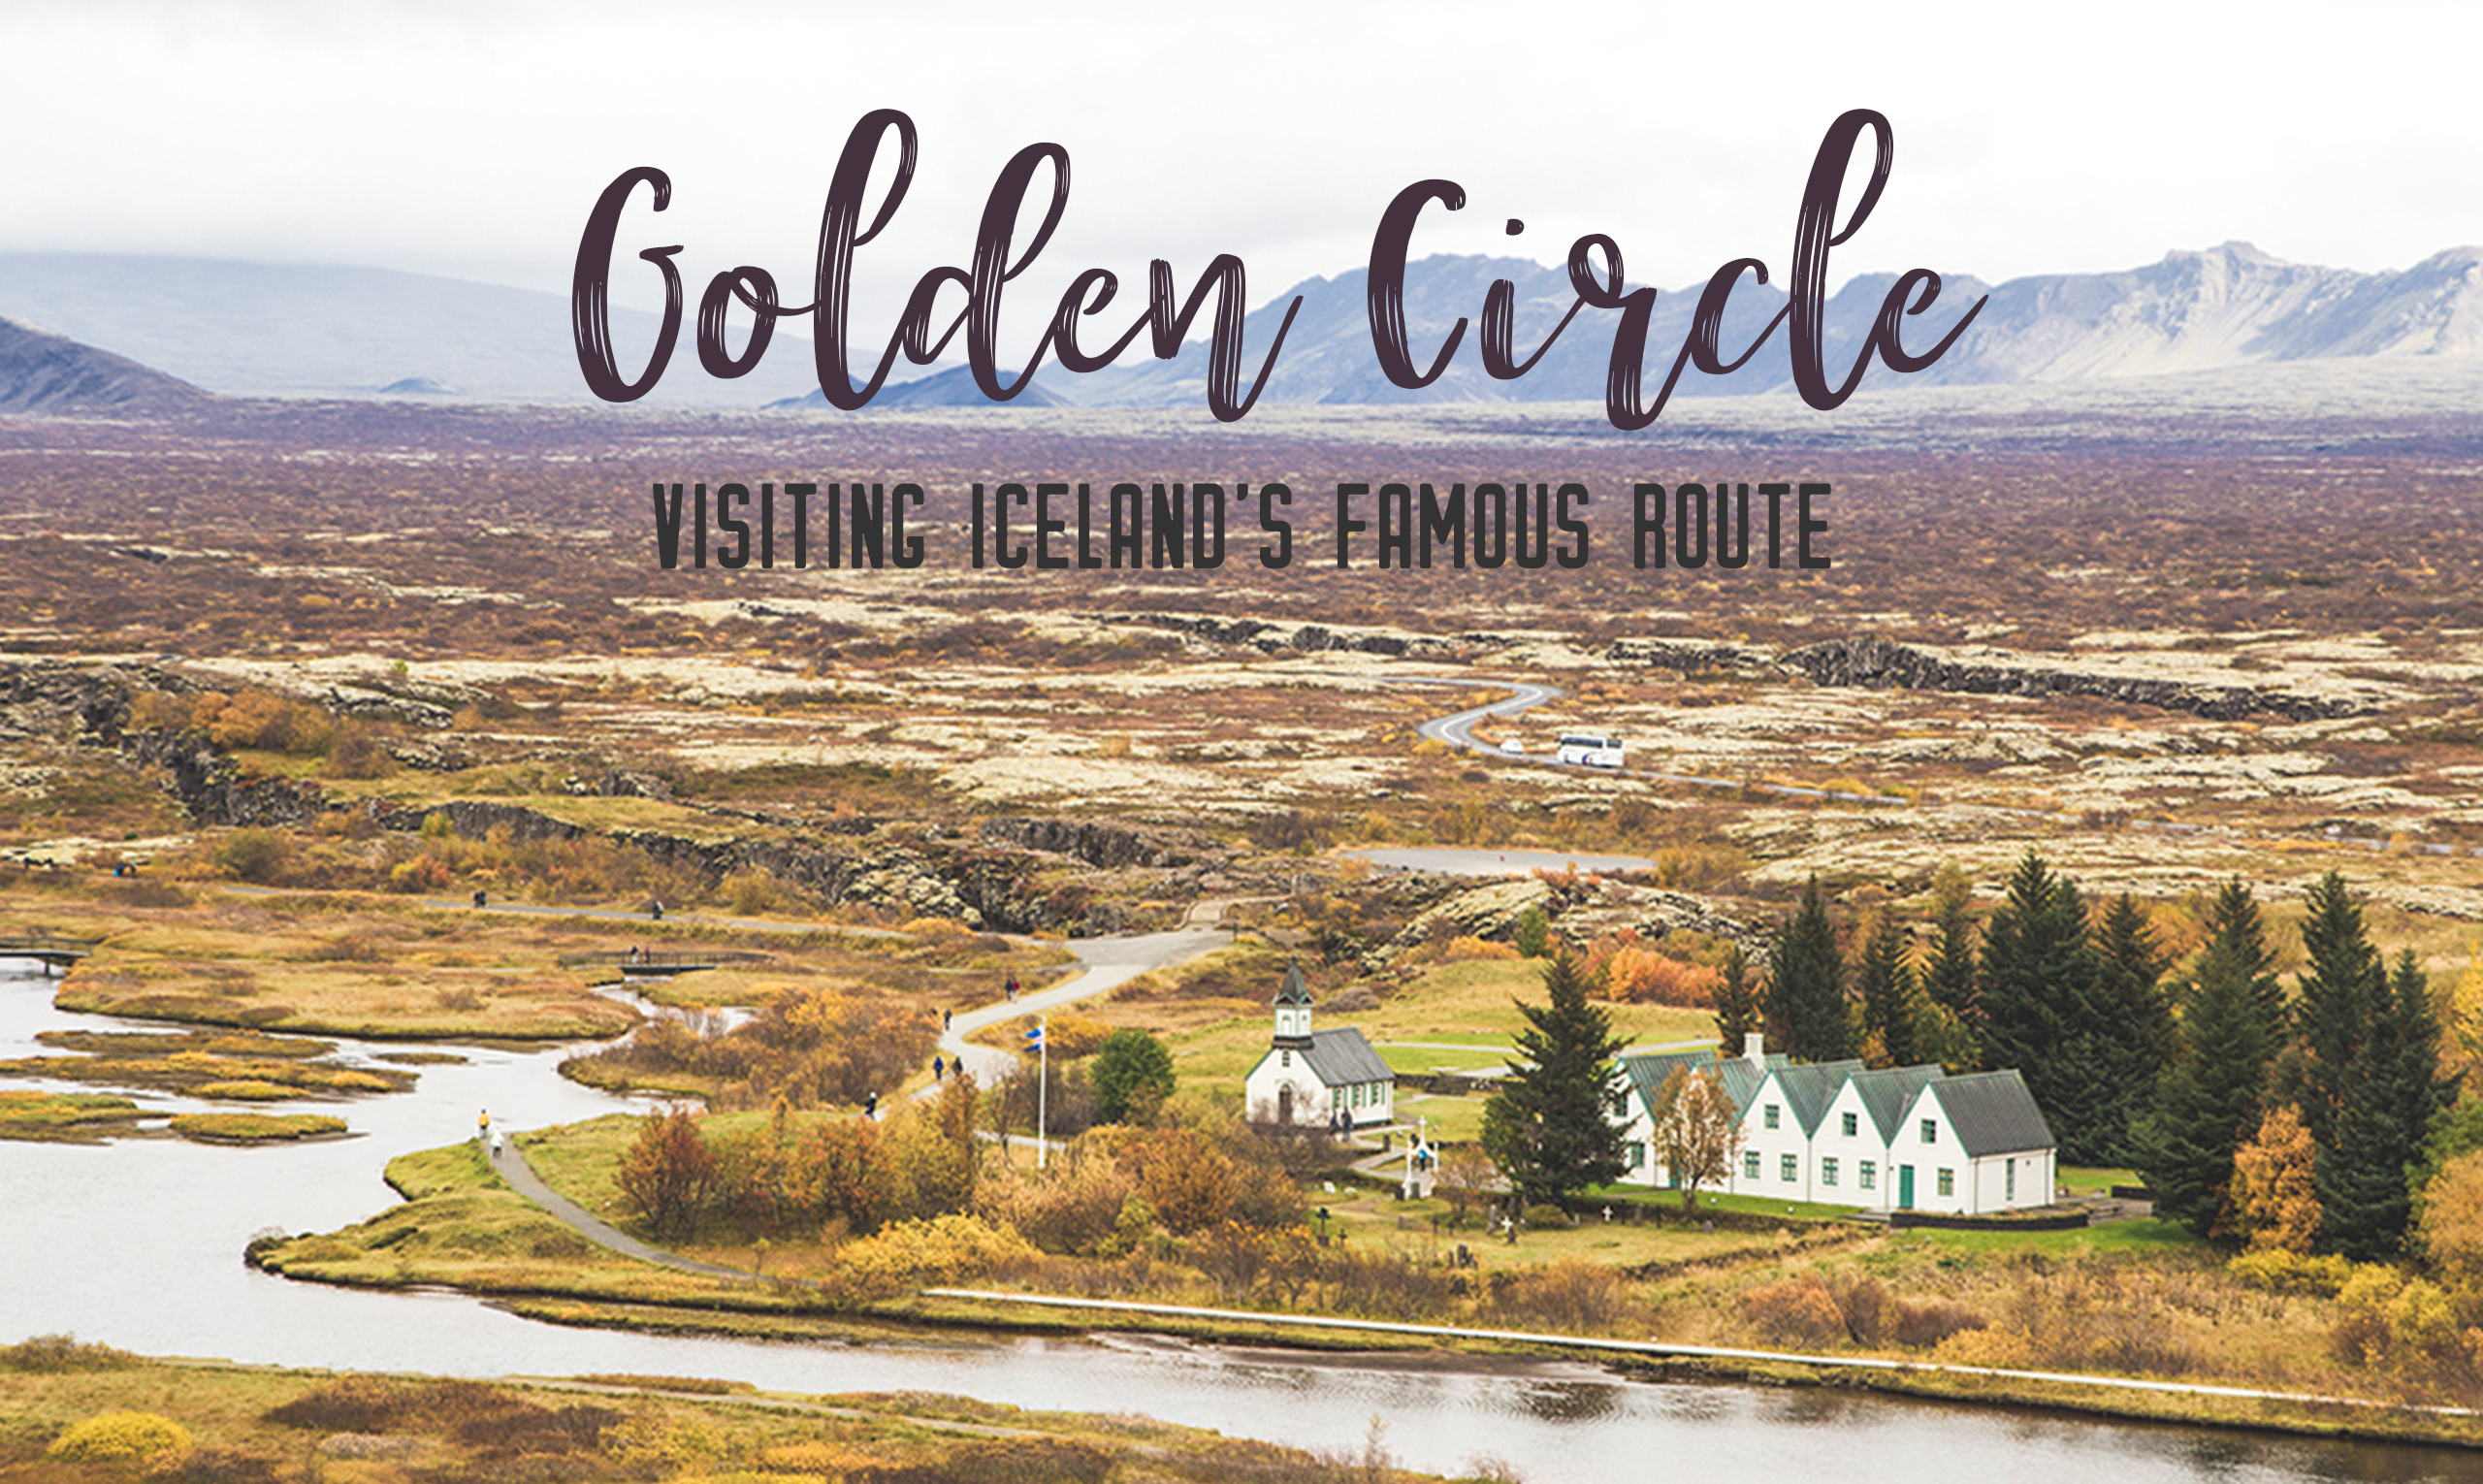 The Golden Circle is a well-known destination in Iceland, and it’s easy to see why. The Golden Circle is part of a road loop that can be seen in a day from Reykjavik and hits some of Iceland’s most famous landmarks | My Wandering Voyage travel blog